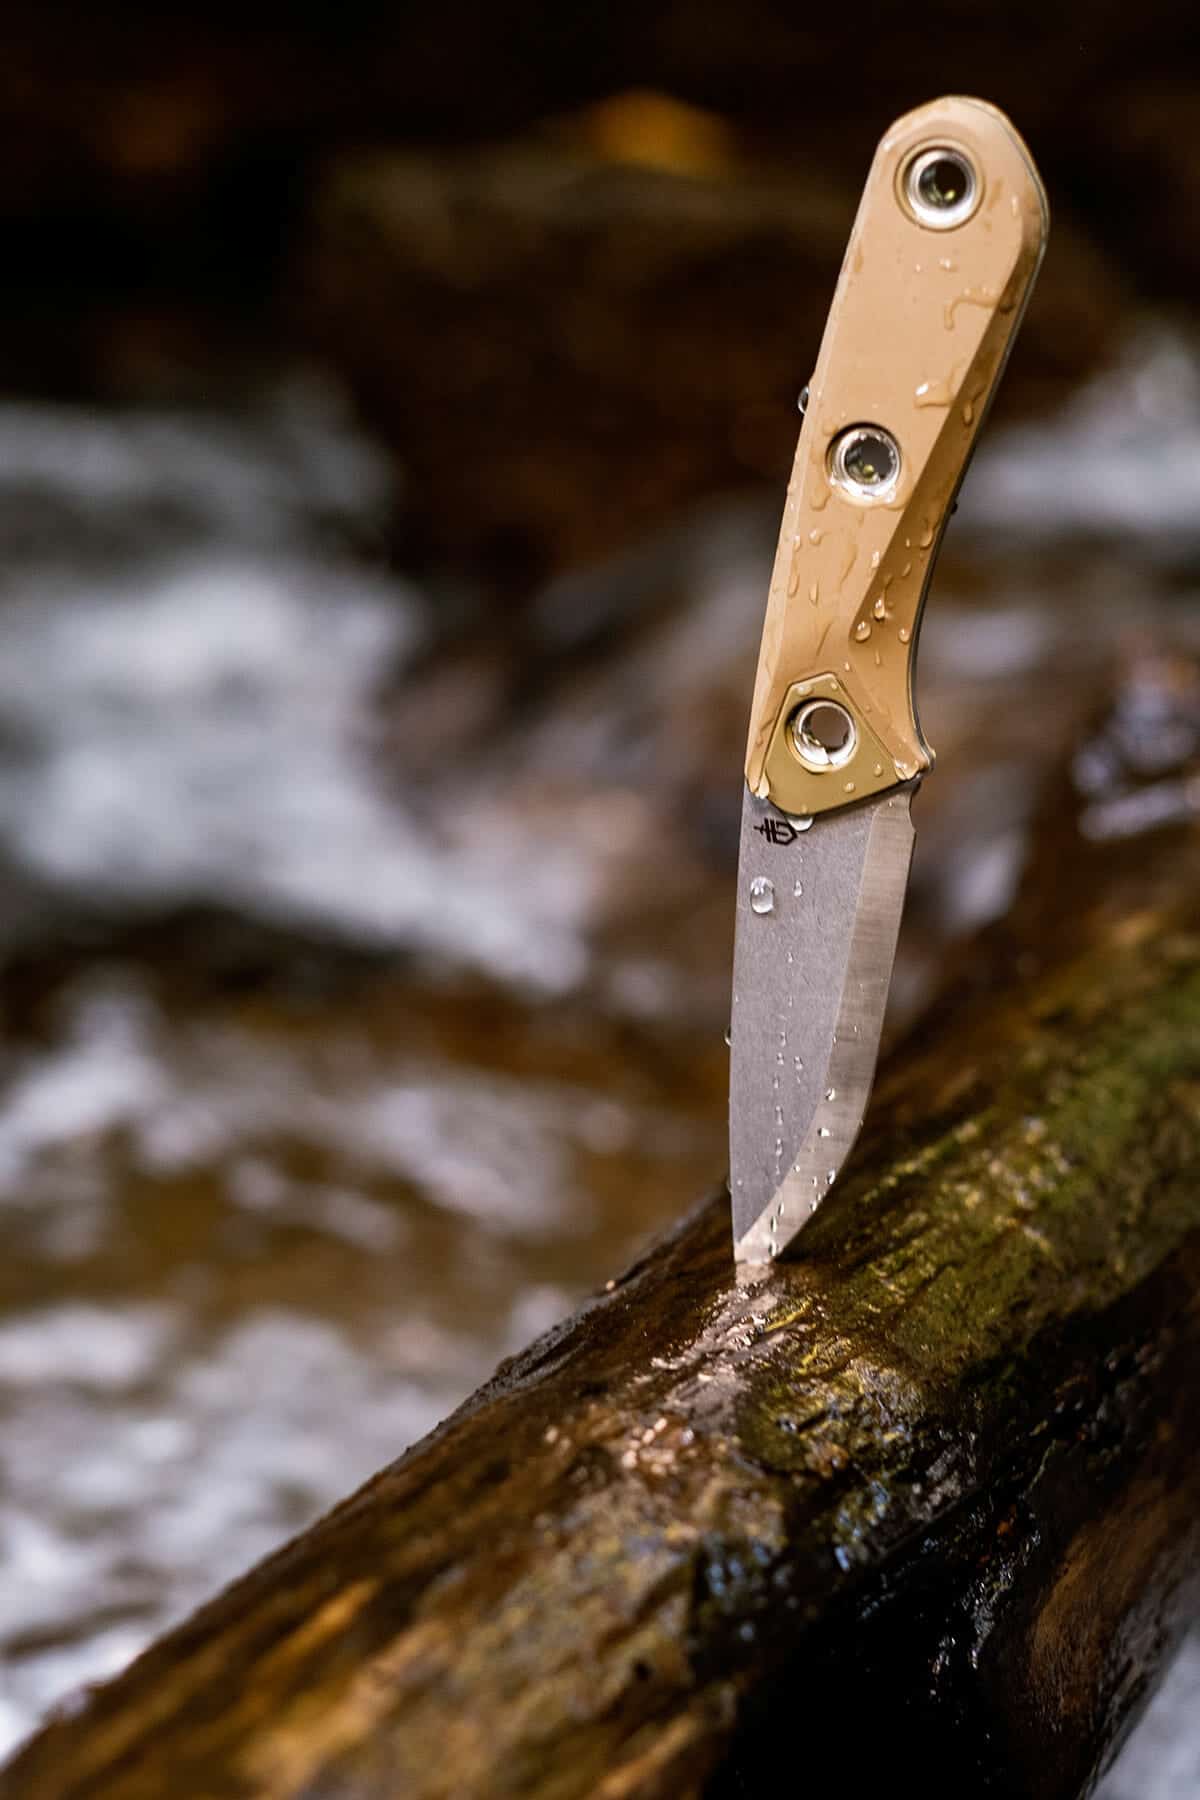 Gerber Prinicple Bushcraft Knife in the great outdoors. 